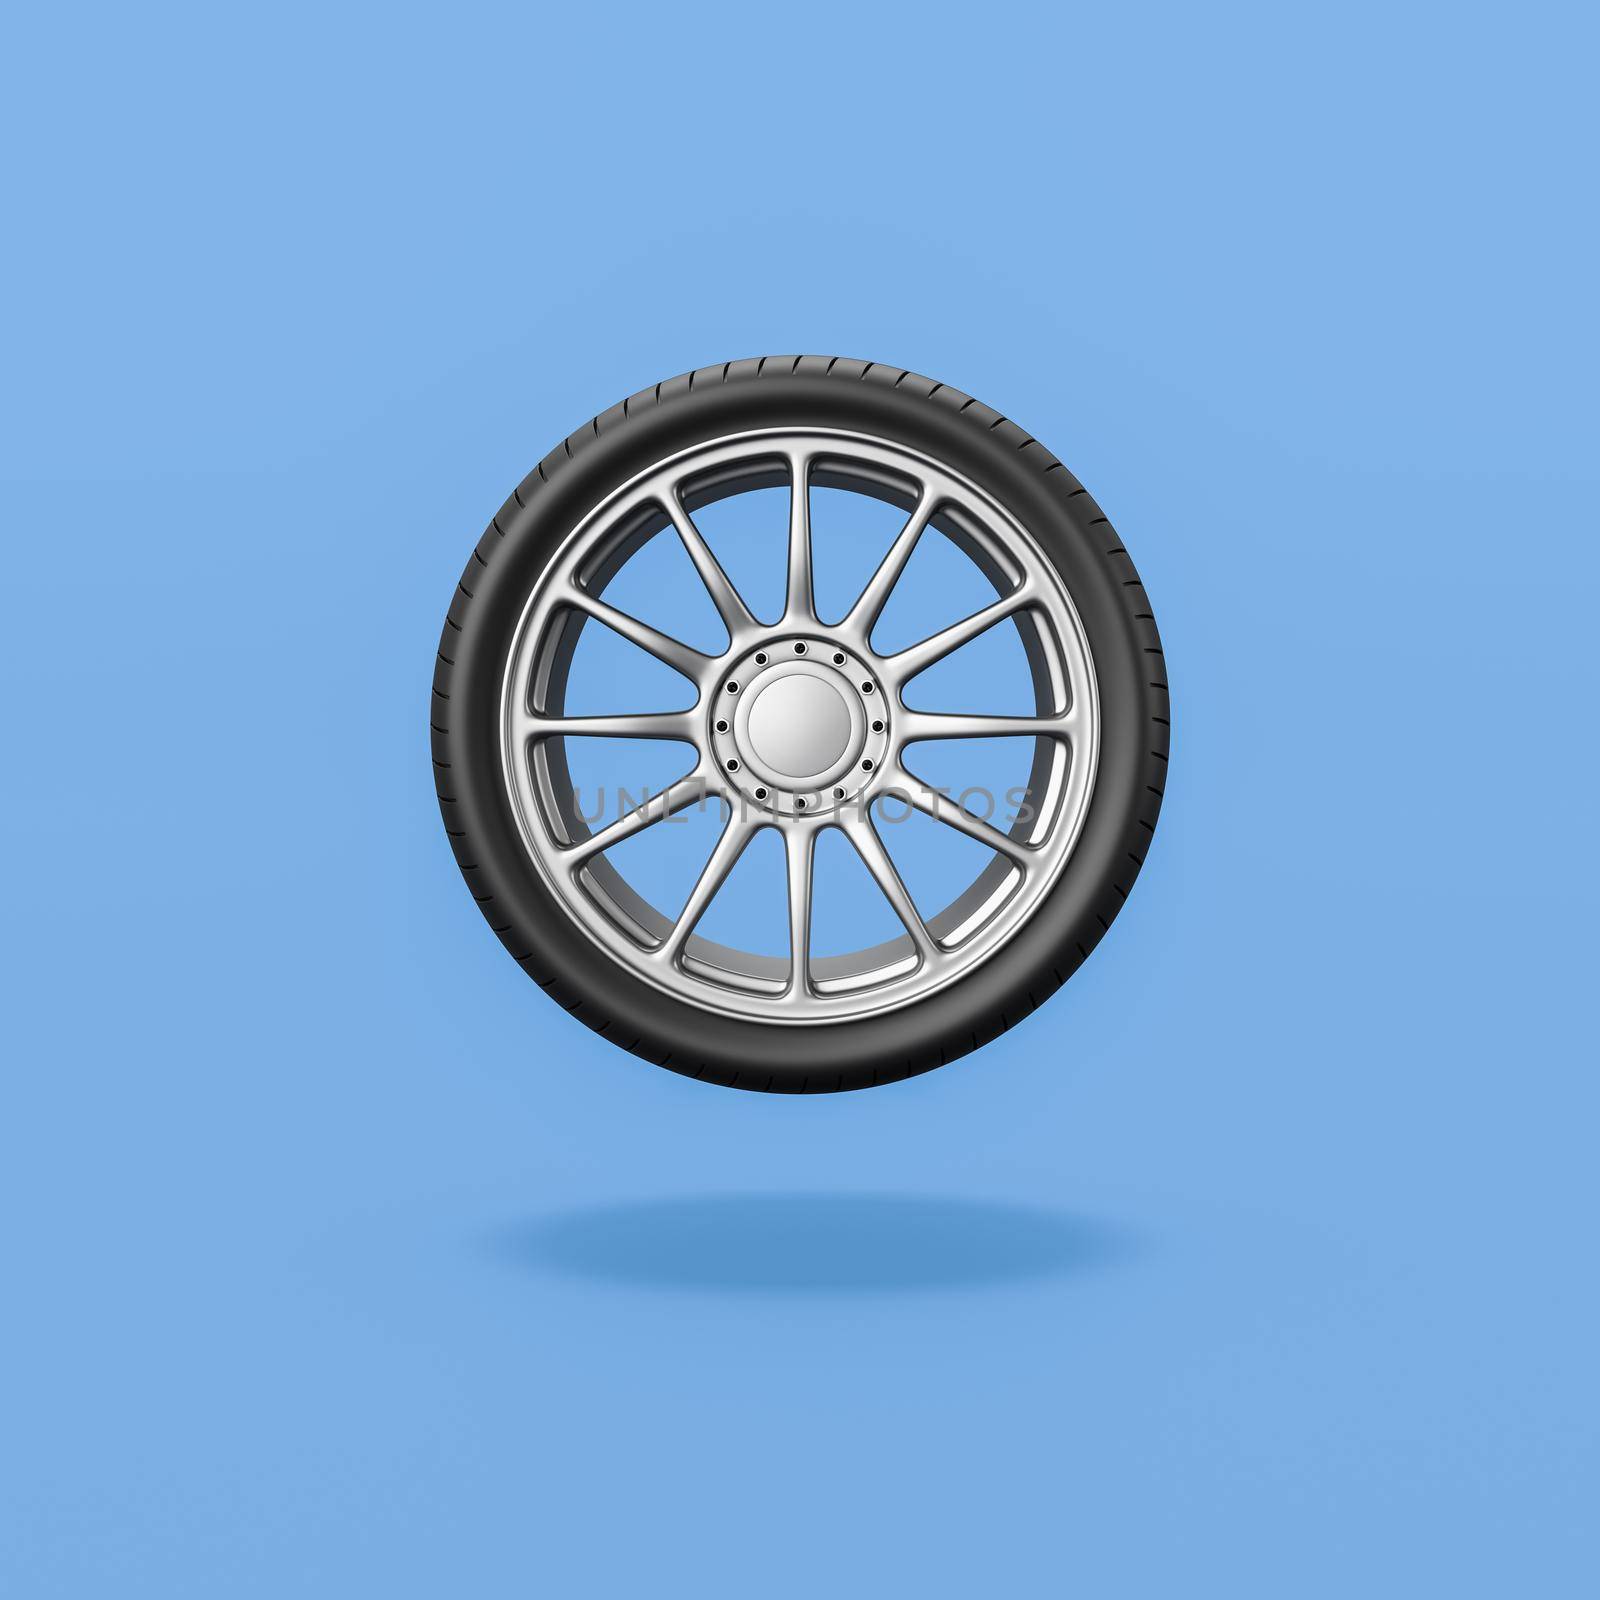 Car Wheel on Blue Background by make